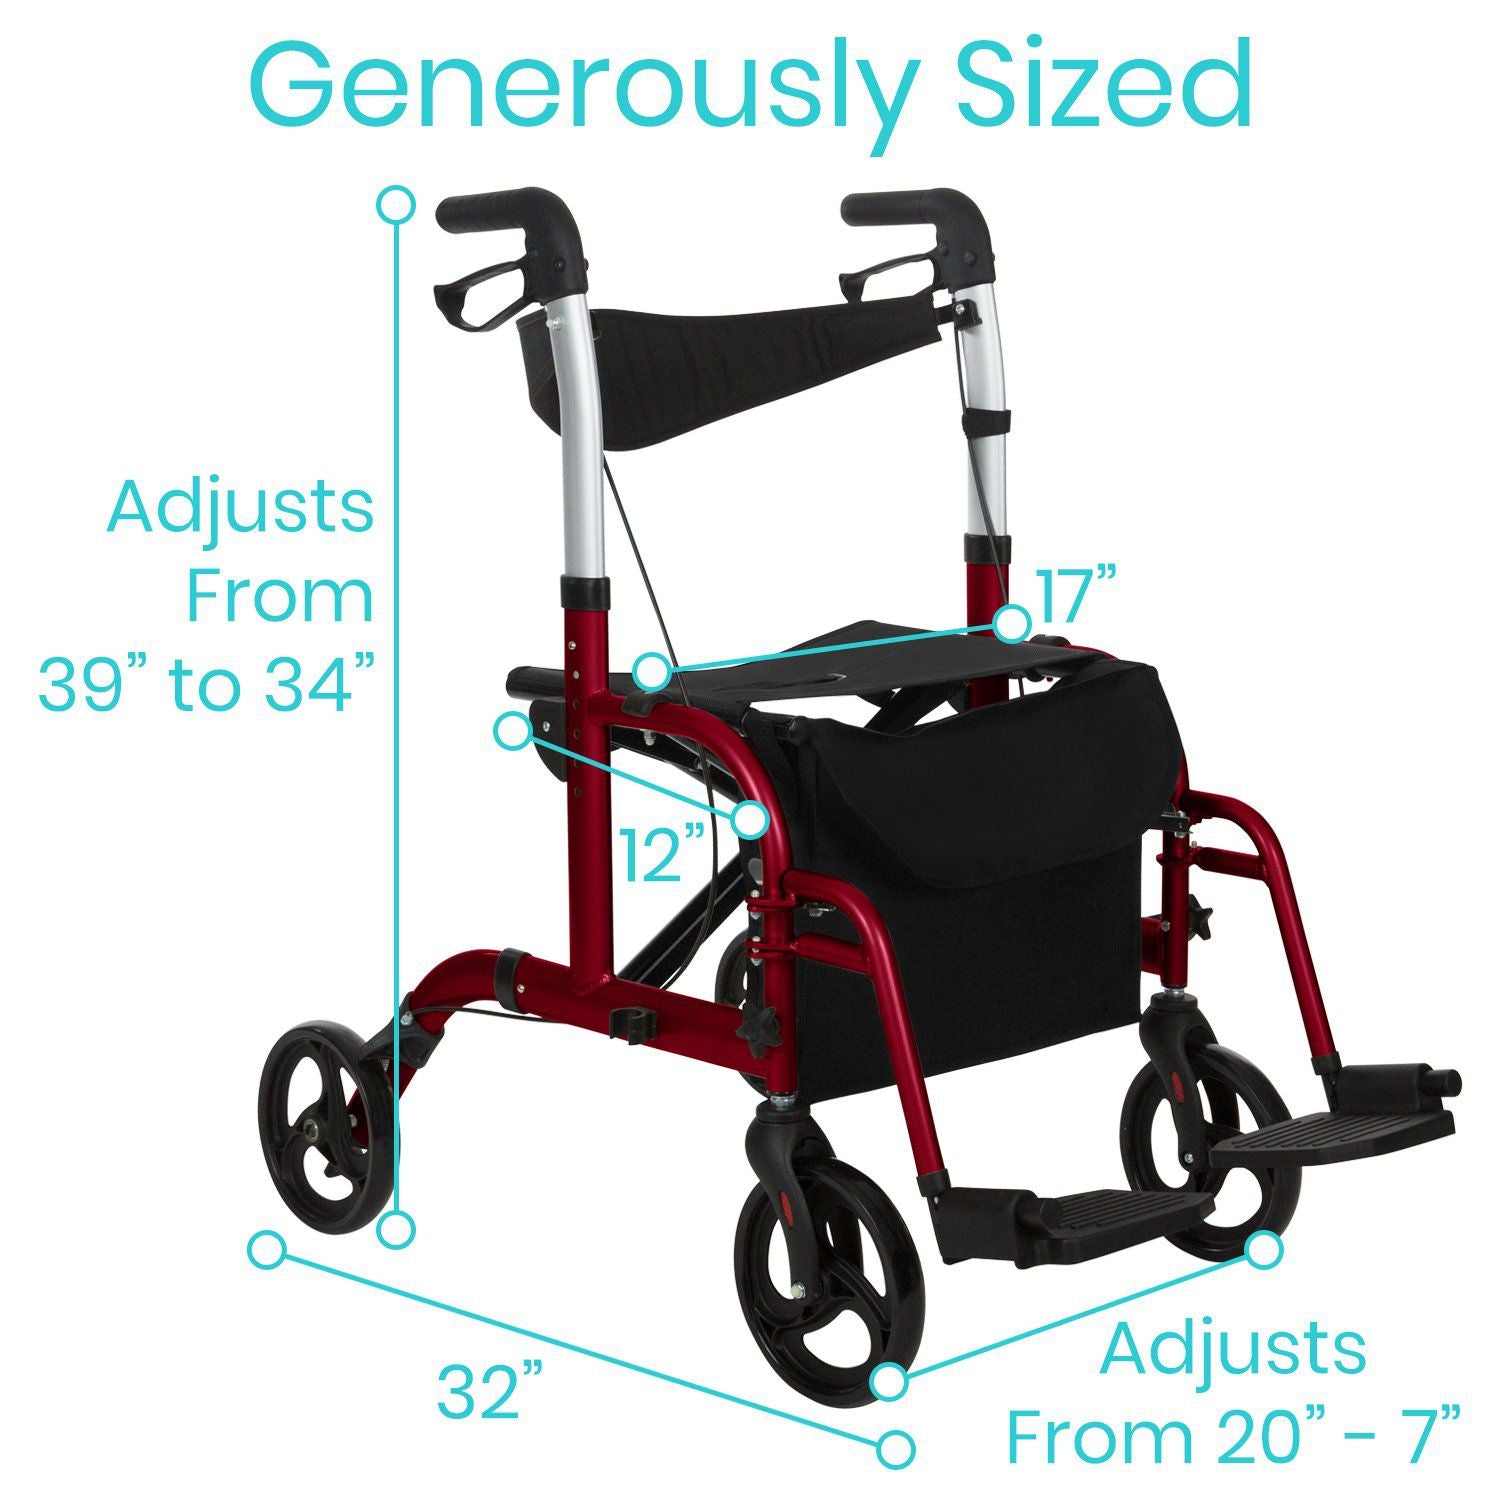 RED Mobility - Vive - Wasatch Medical Supply